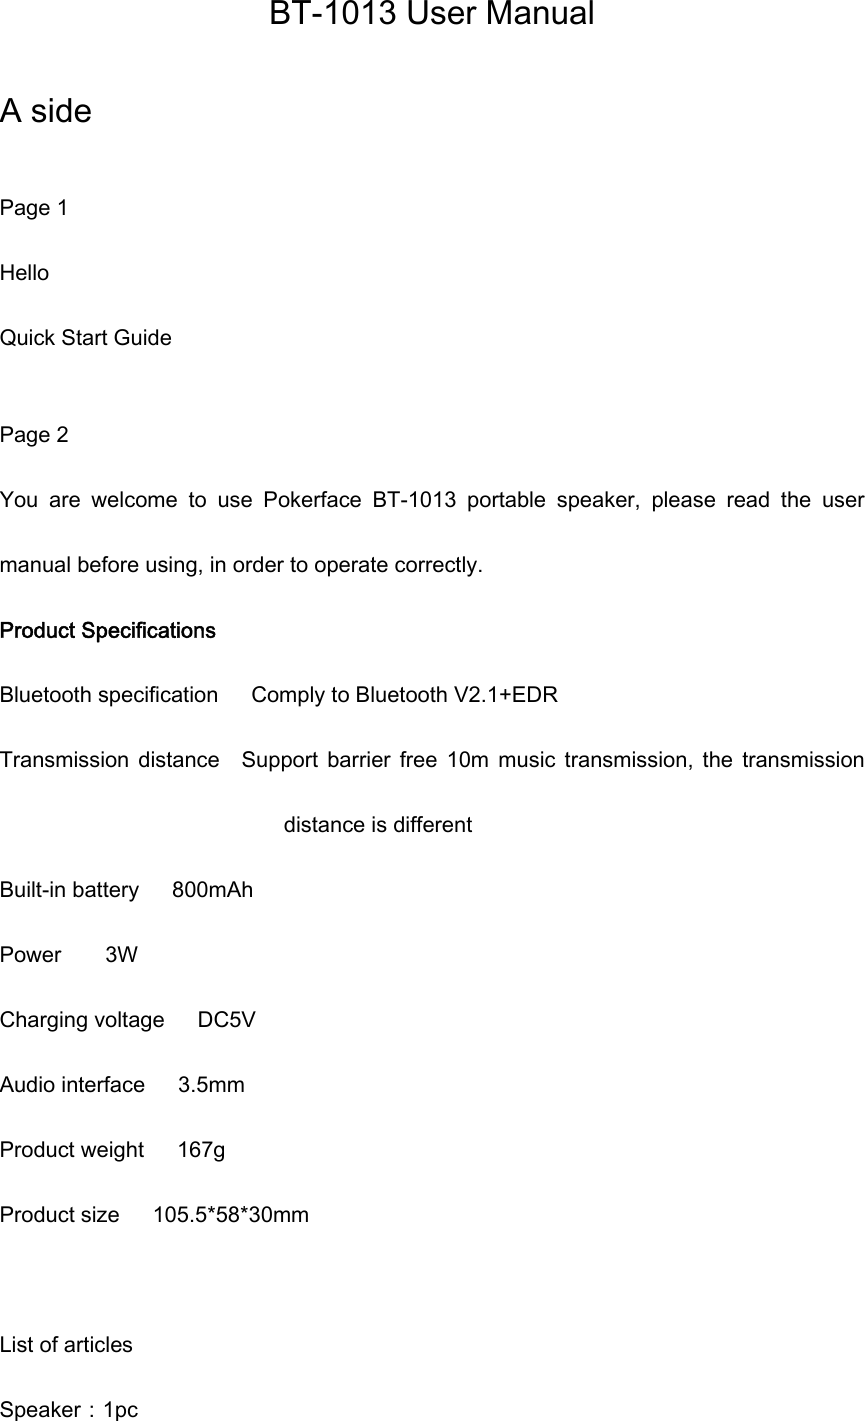 BT-1013 User Manual  A side  Page 1 Hello Quick Start Guide  Page 2 You  are  welcome  to  use  Pokerface  BT-1013  portable  speaker,  please  read  the  user manual before using, in order to operate correctly. Product Specifications Bluetooth specification      Comply to Bluetooth V2.1+EDR Transmission  distance    Support  barrier  free  10m  music  transmission,  the  transmission distance is different Built-in battery      800mAh Power    3W                            Charging voltage      DC5V   Audio interface      3.5mm Product weight      167g Product size      105.5*58*30mm            List of articles Speaker：1pc 